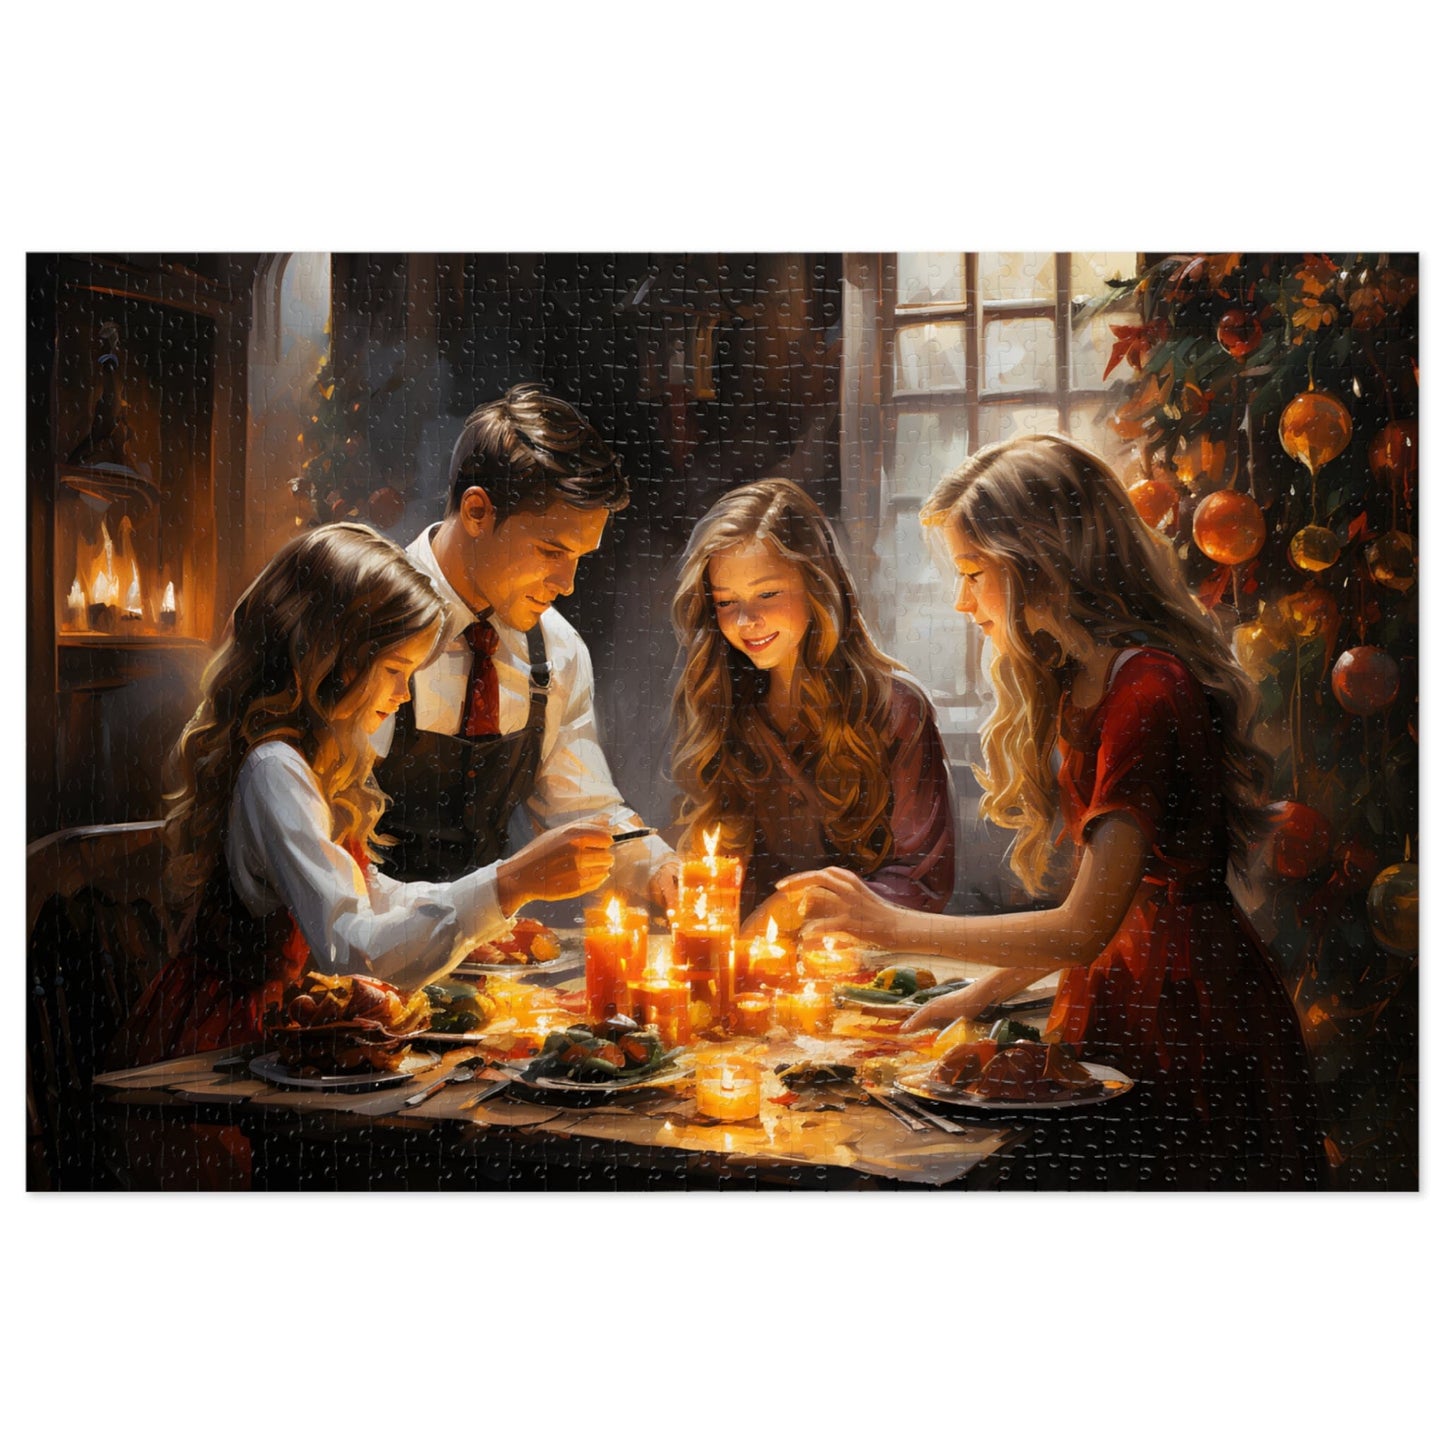 Christmas Dinner Jigsaw Puzzle 1000 Piece: Joyful Family Dinner Scene | Custom Sizes (110-1000 Pieces) | Limited Edition Festive Gift | Stress-Relief Activity for All Ages